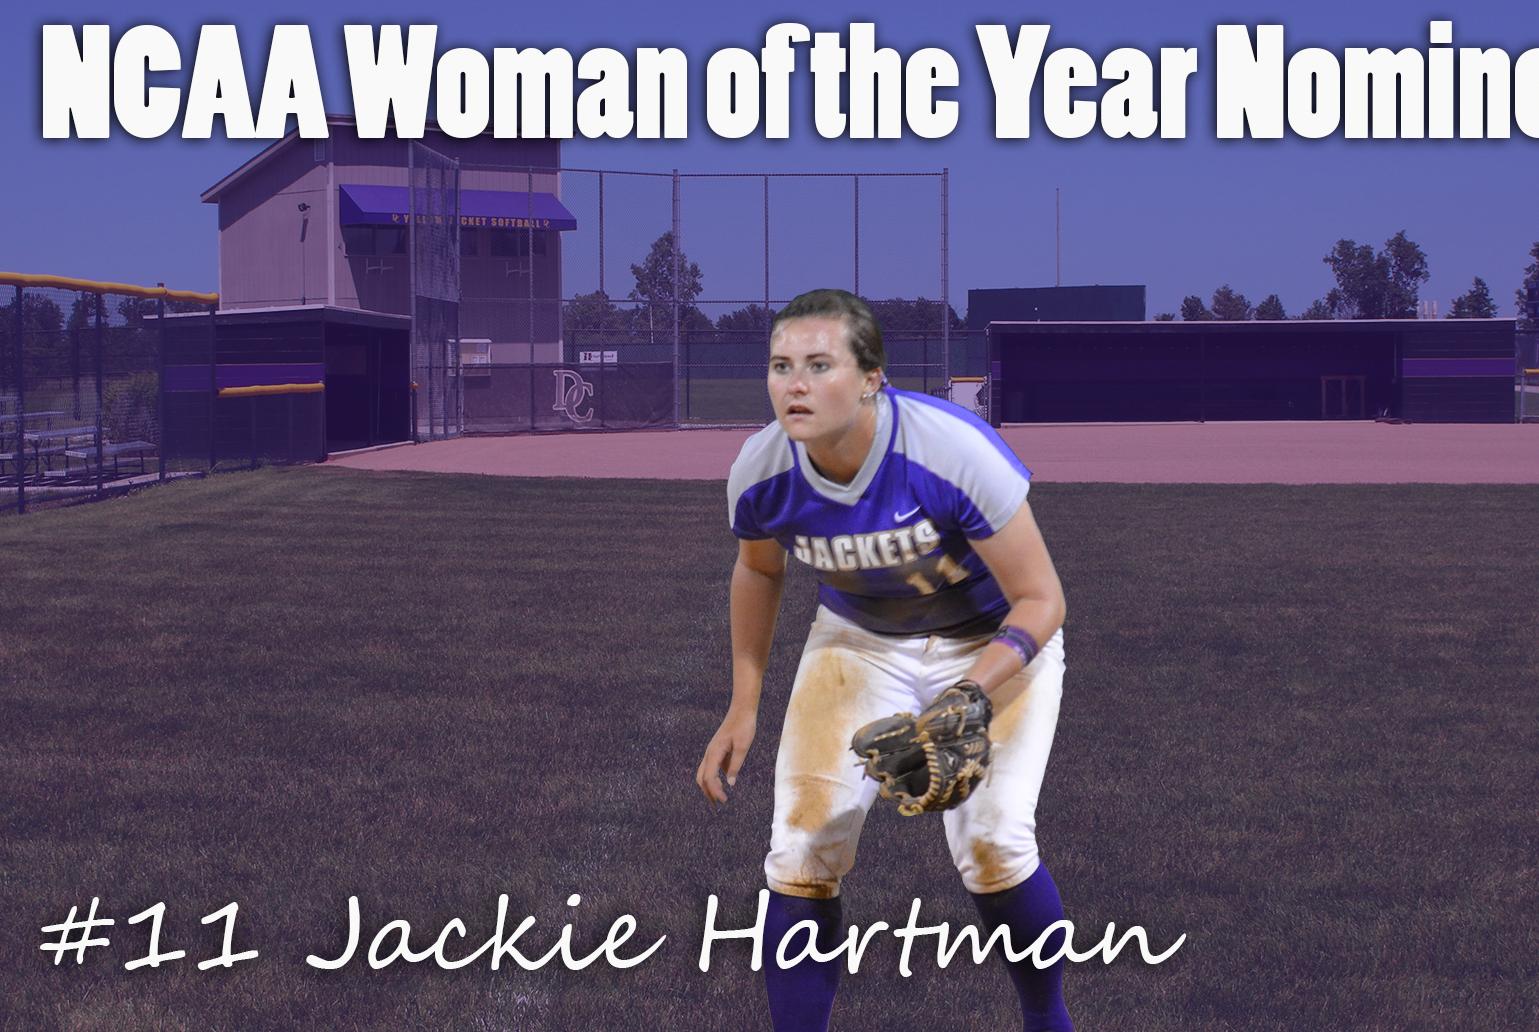 Hartman Selected to Represent Defiance for NCAA Woman of the Year